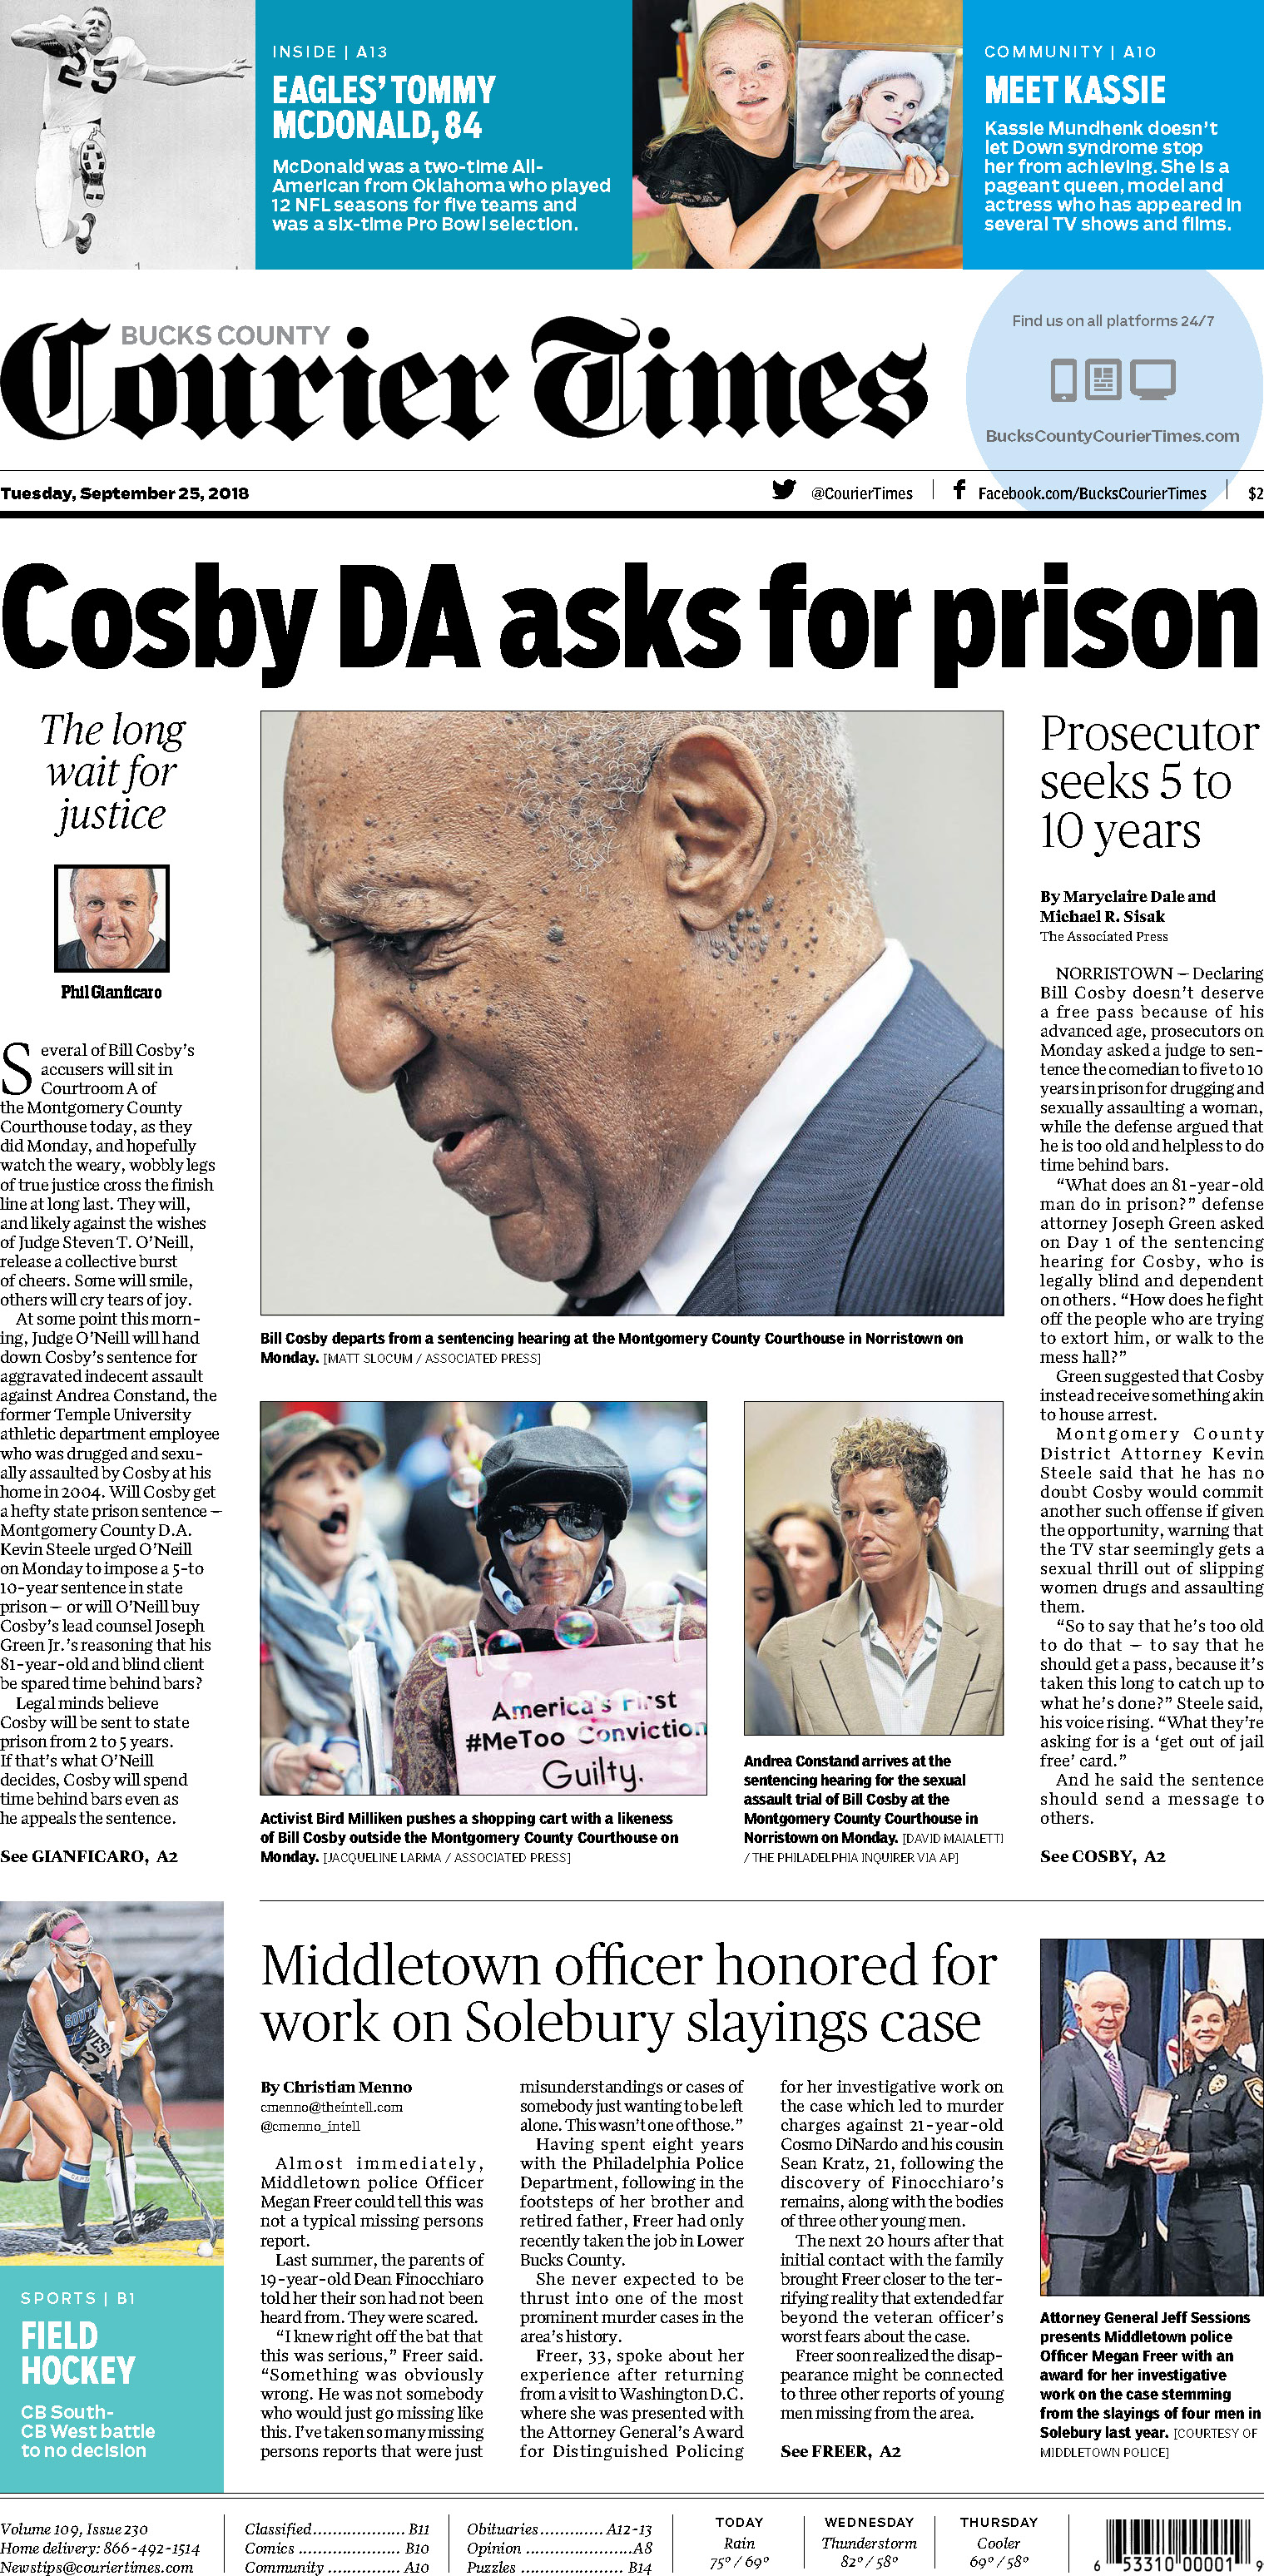 0925_PA_Bucks County Courier Times A1 - News Cover.jpg